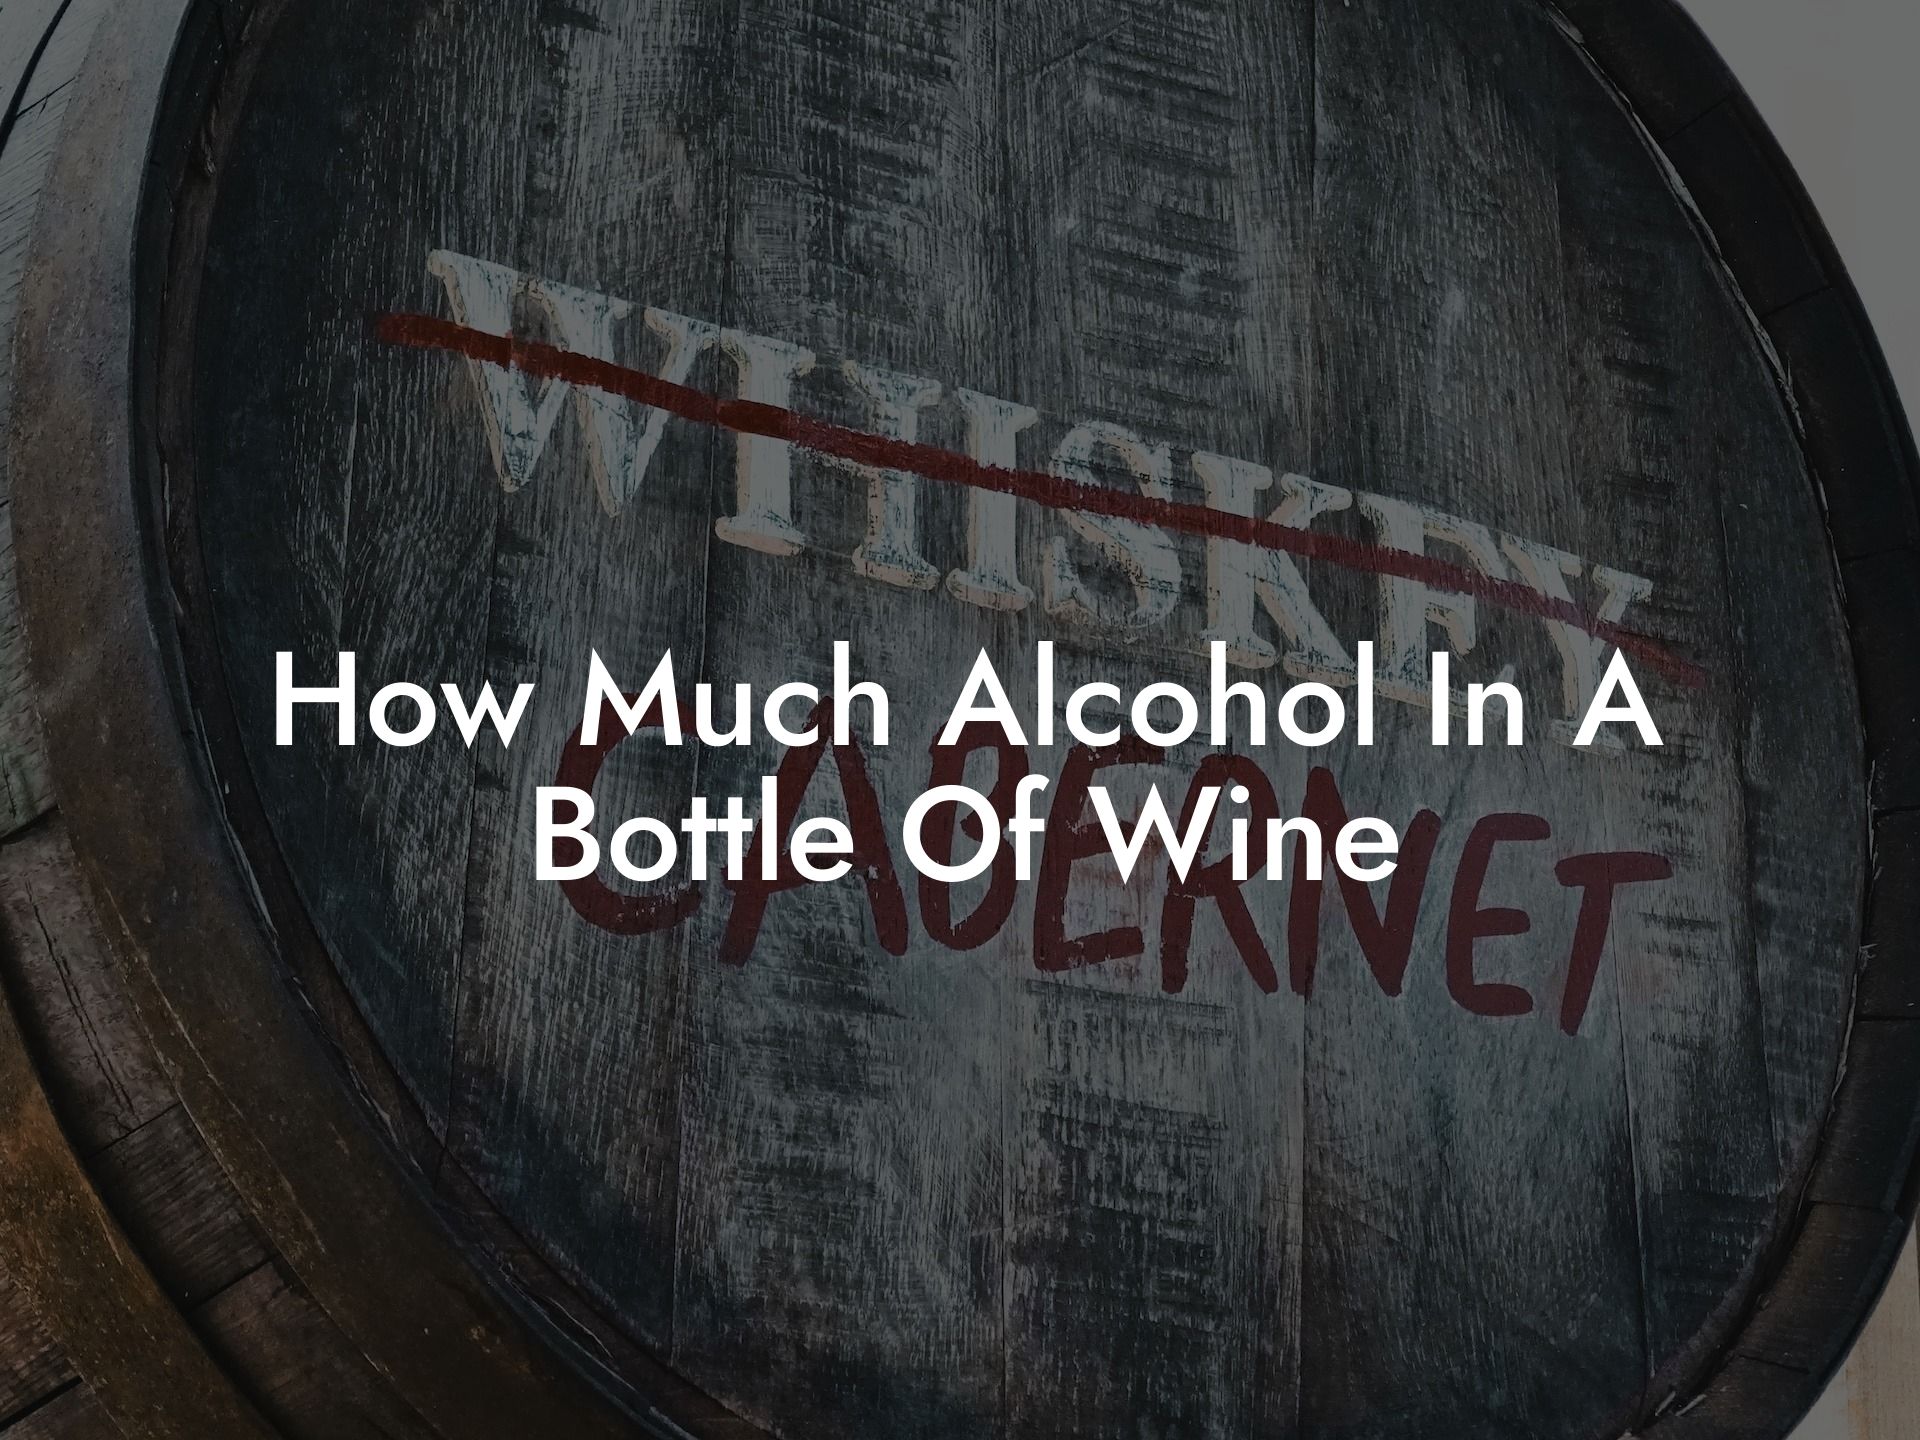 How Much Alcohol In A Bottle Of Wine